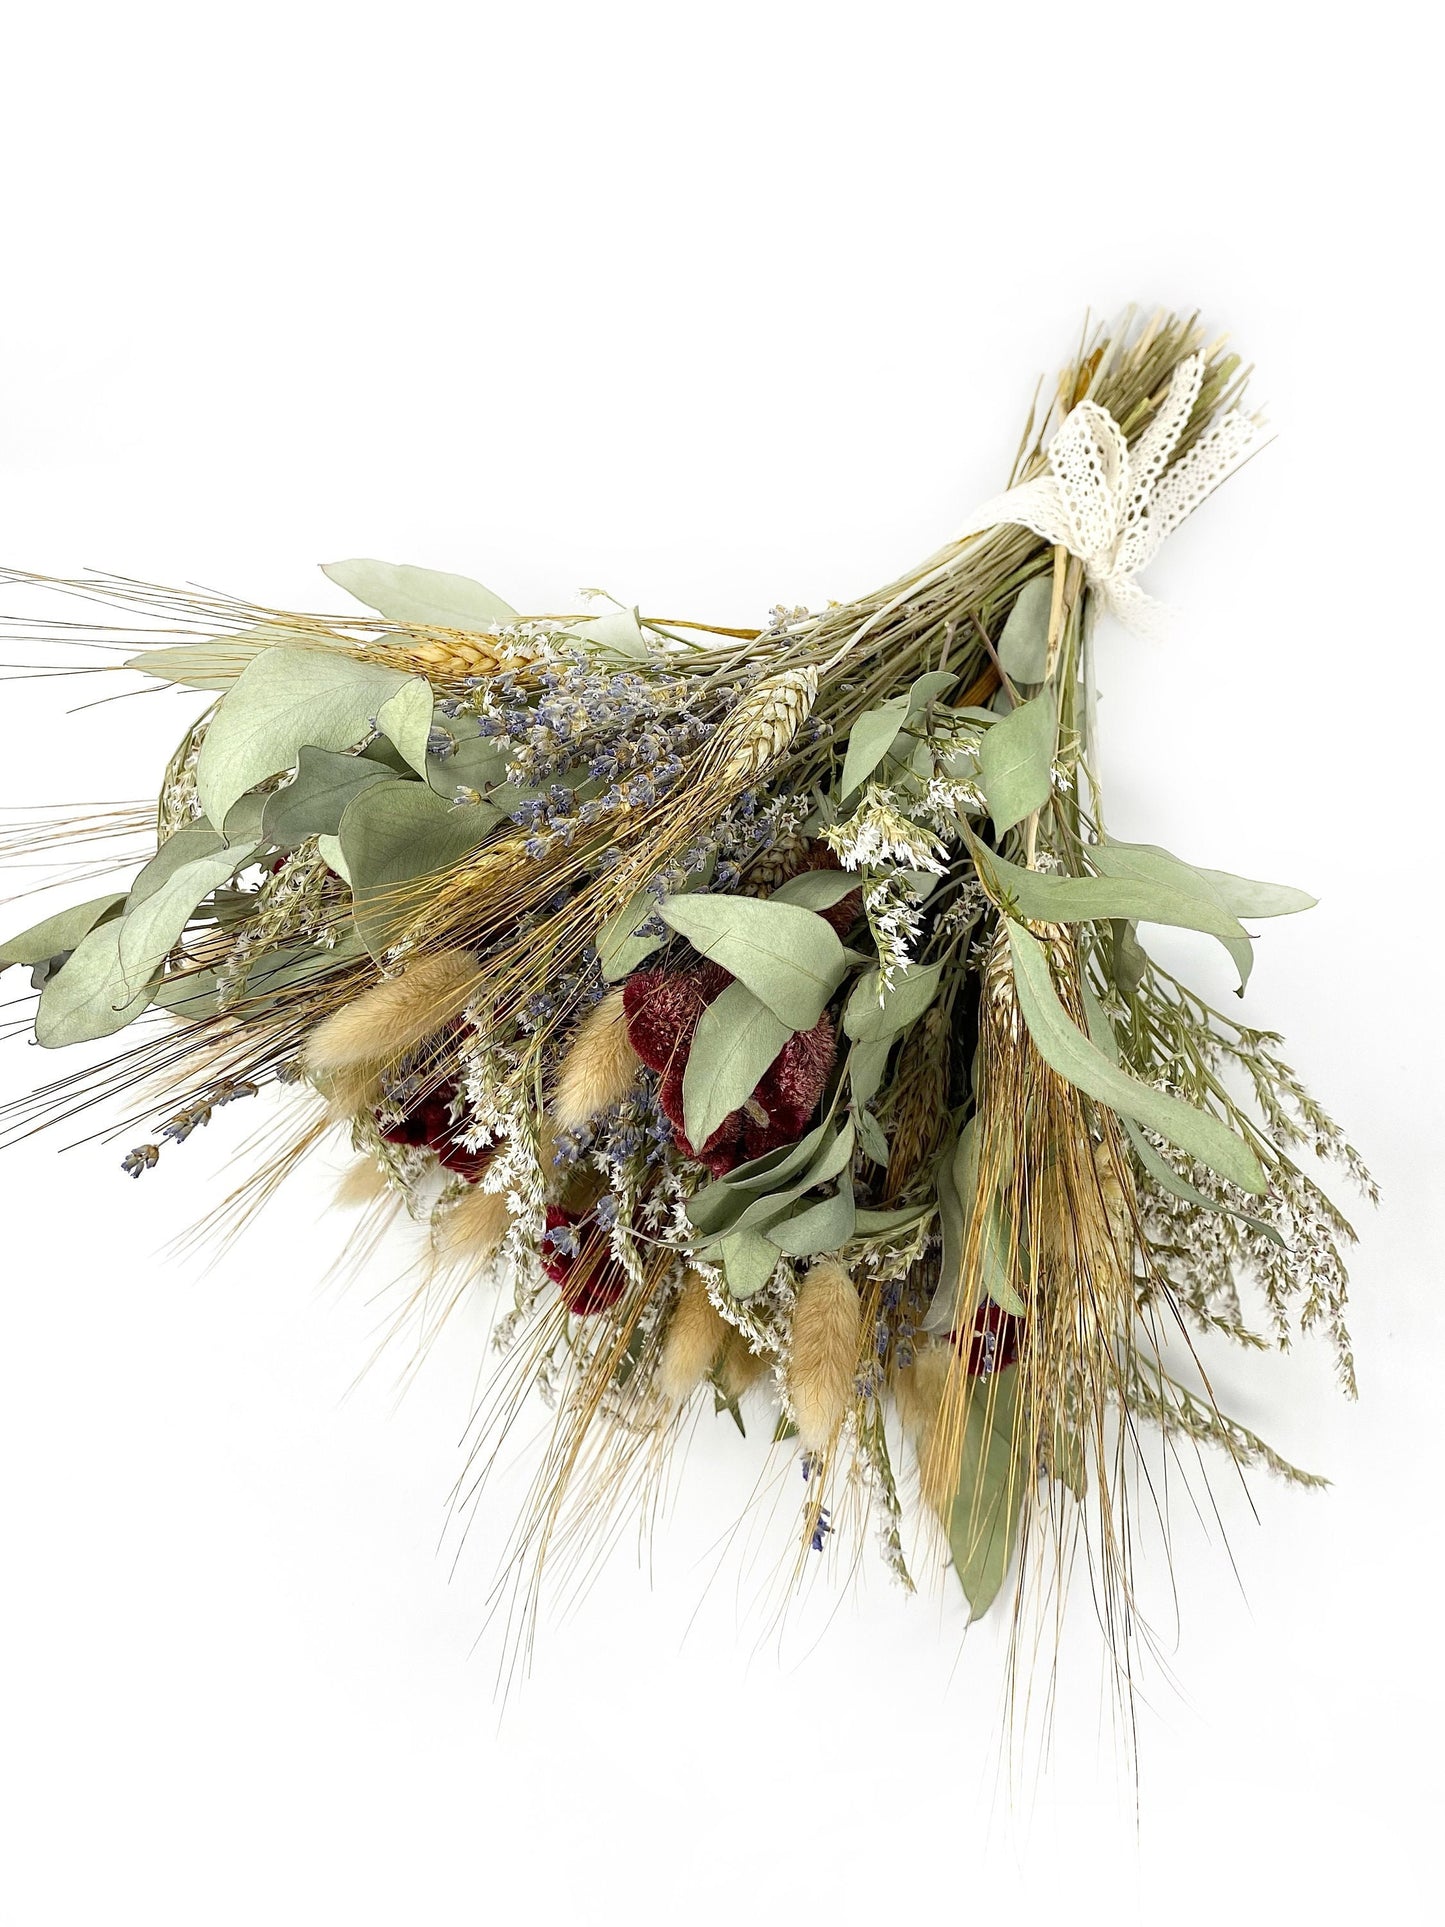 Wedding Bouquet, Floral Arrangement, Dried Flowers, Preserved, Greenery, Dried Flowers, German Statice, Bridal, Lavender, Natural